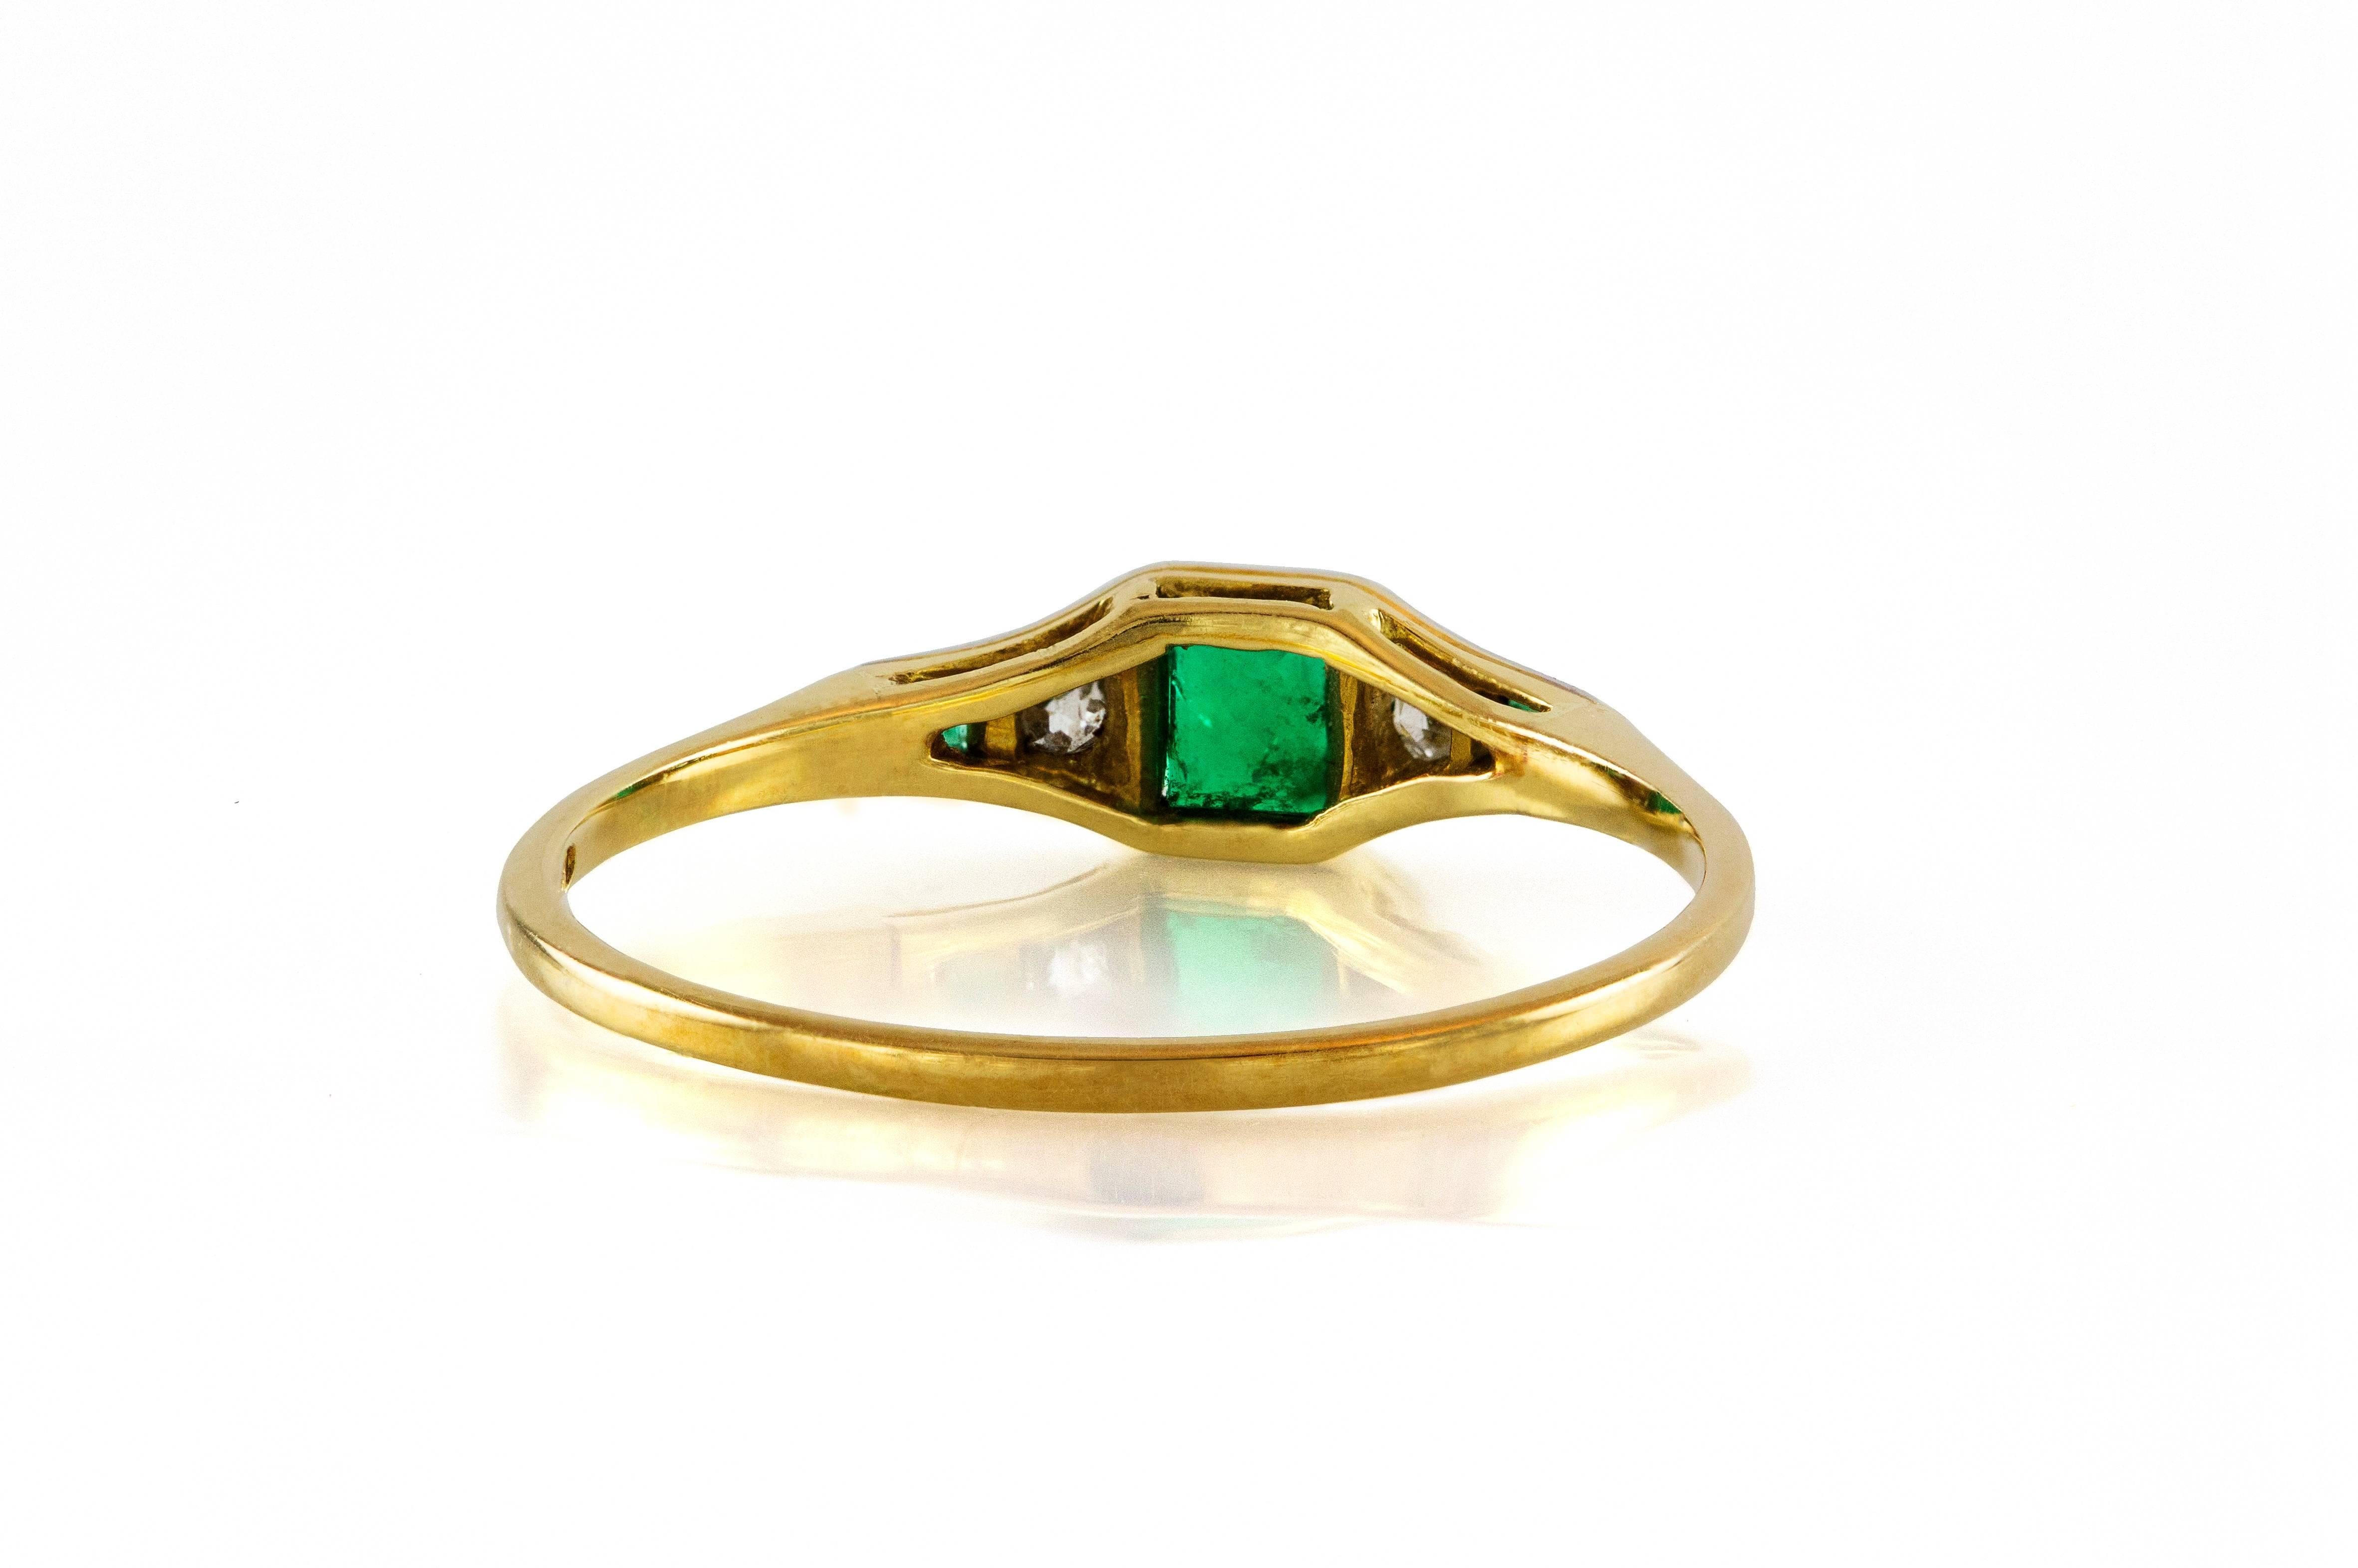 Antique Emerald Diamond Gold Ring For Sale at 1stDibs